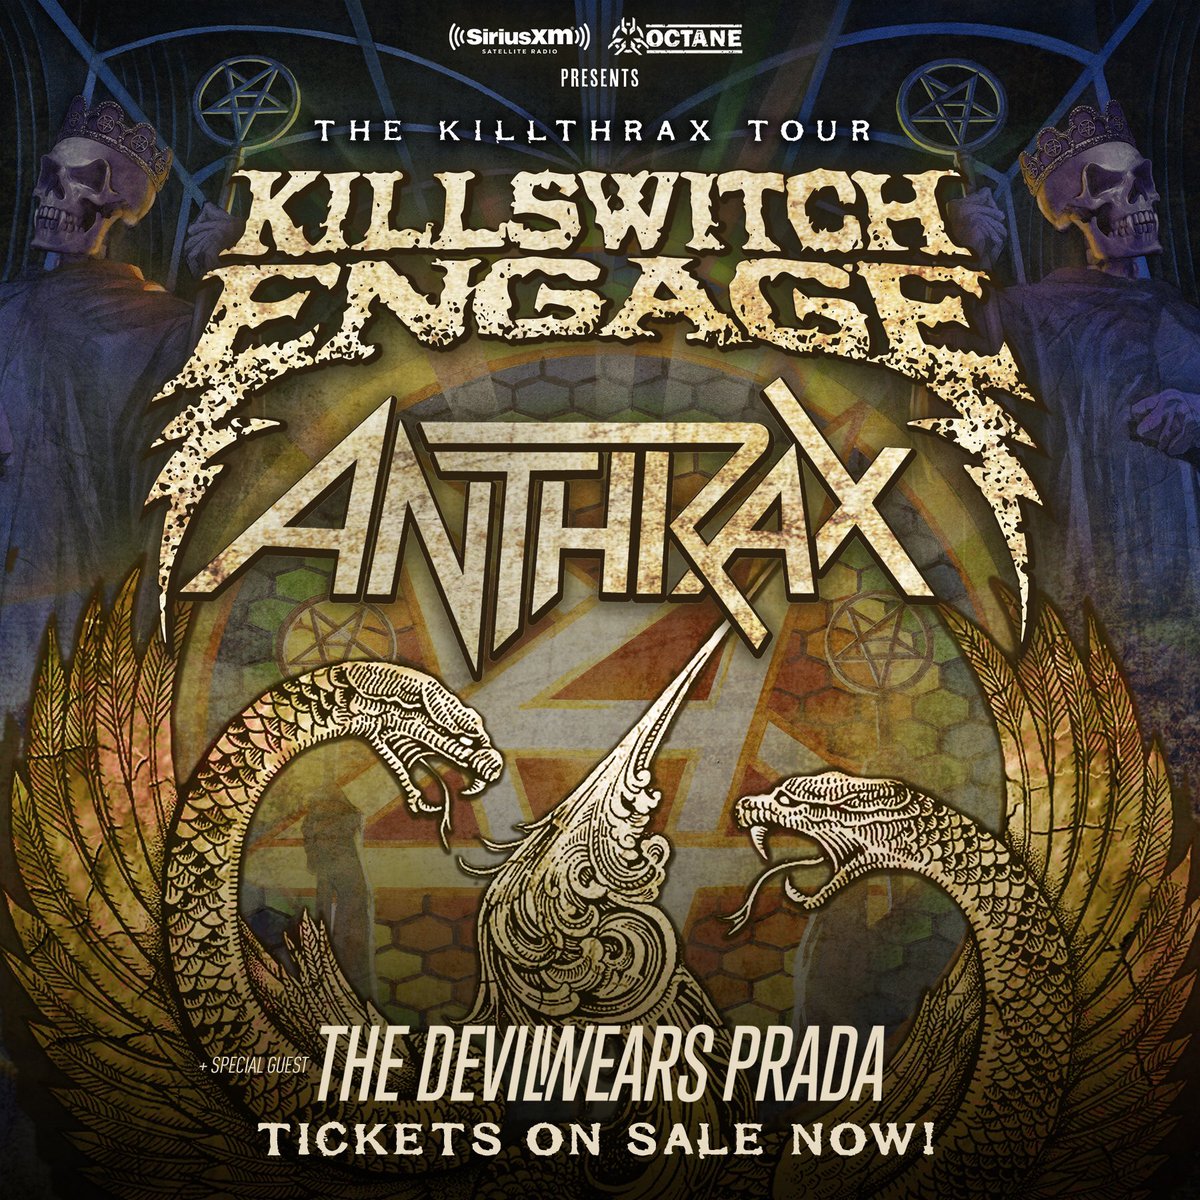 High Resolution Wallpaper | Killswitch Engage 1200x1200 px